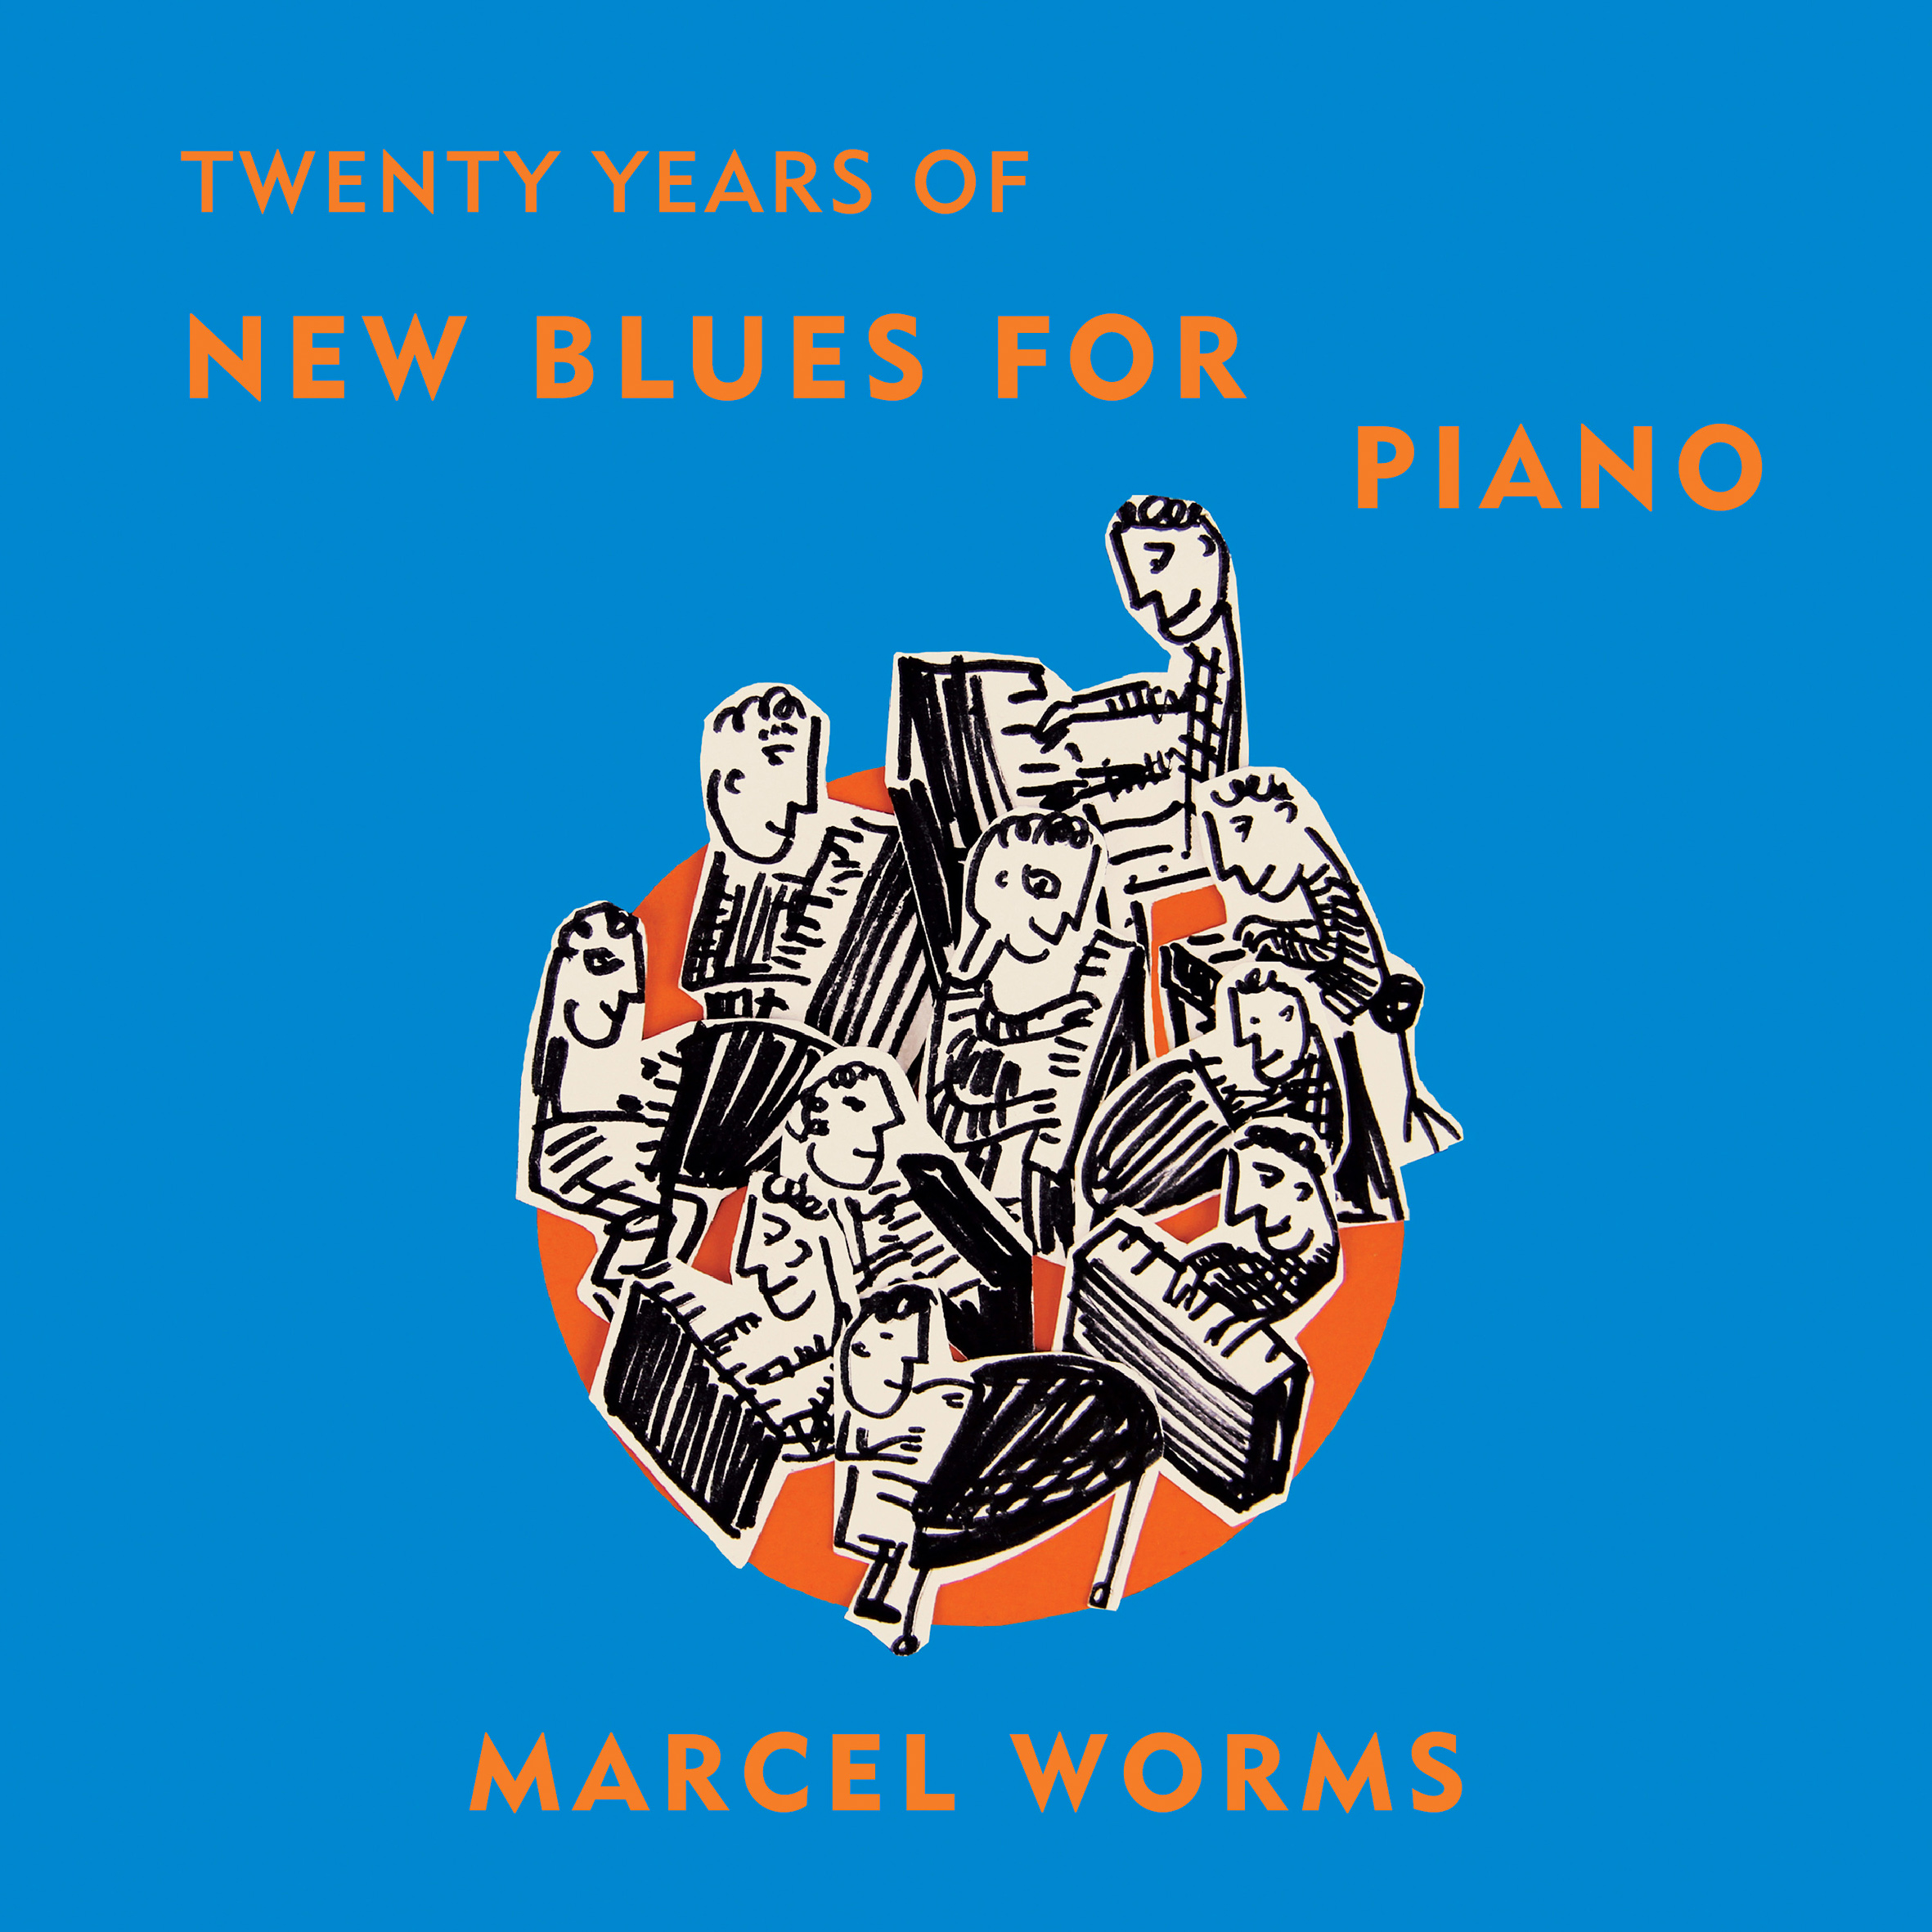 Marcel Worms - Twenty Years Of New Blues For Piano (2017) [HDTracks FLAC 24bit/96kHz]